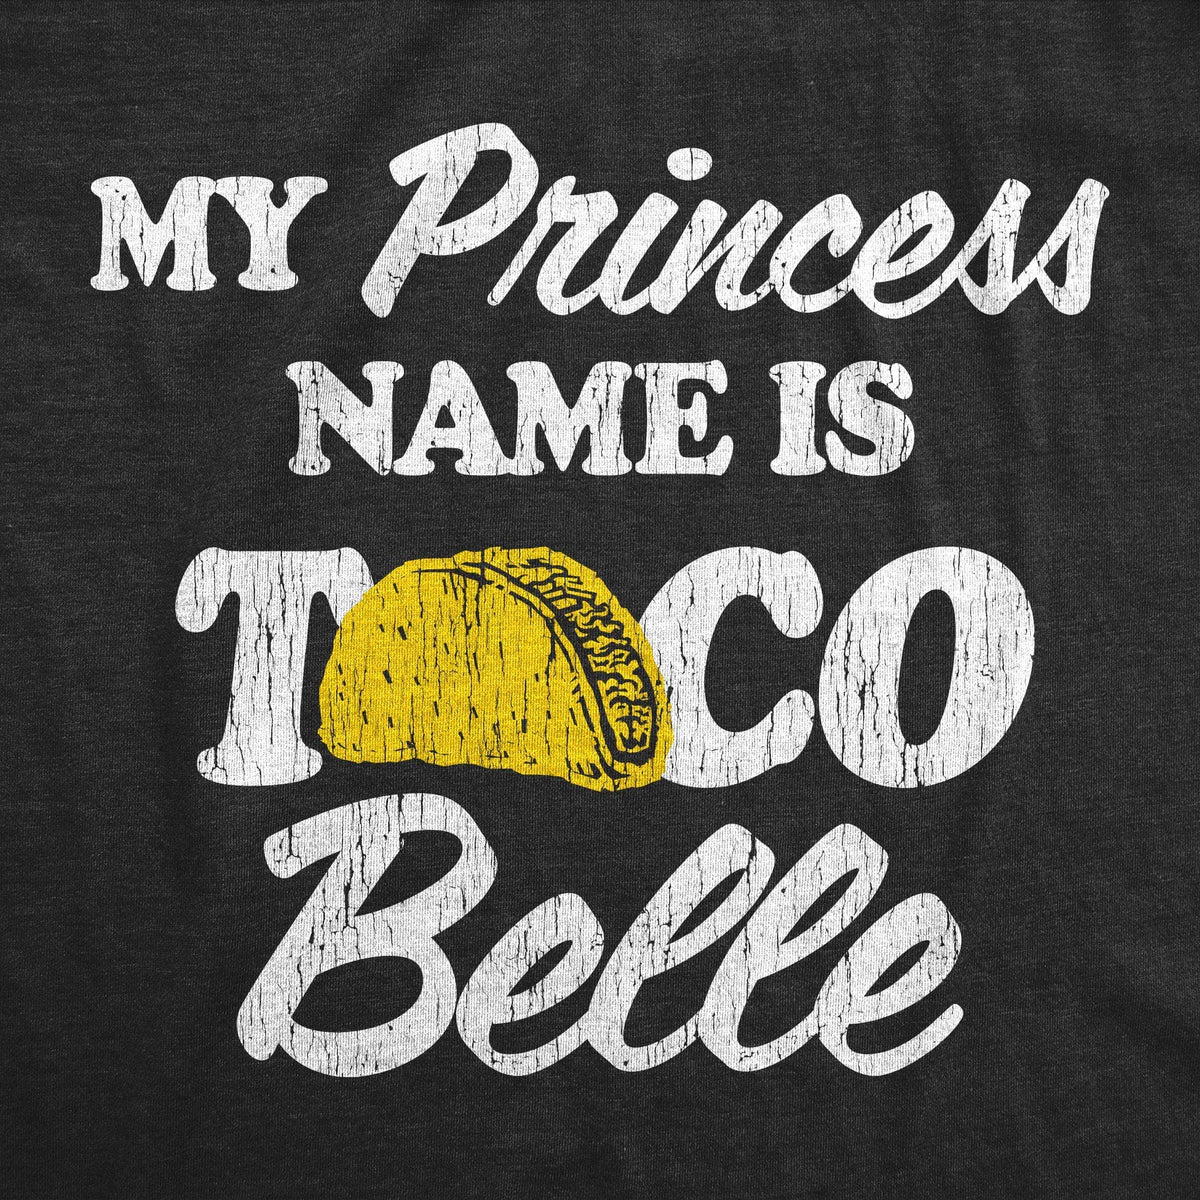 My Princess Name Is Taco Belle Women&#39;s Tshirt - Crazy Dog T-Shirts